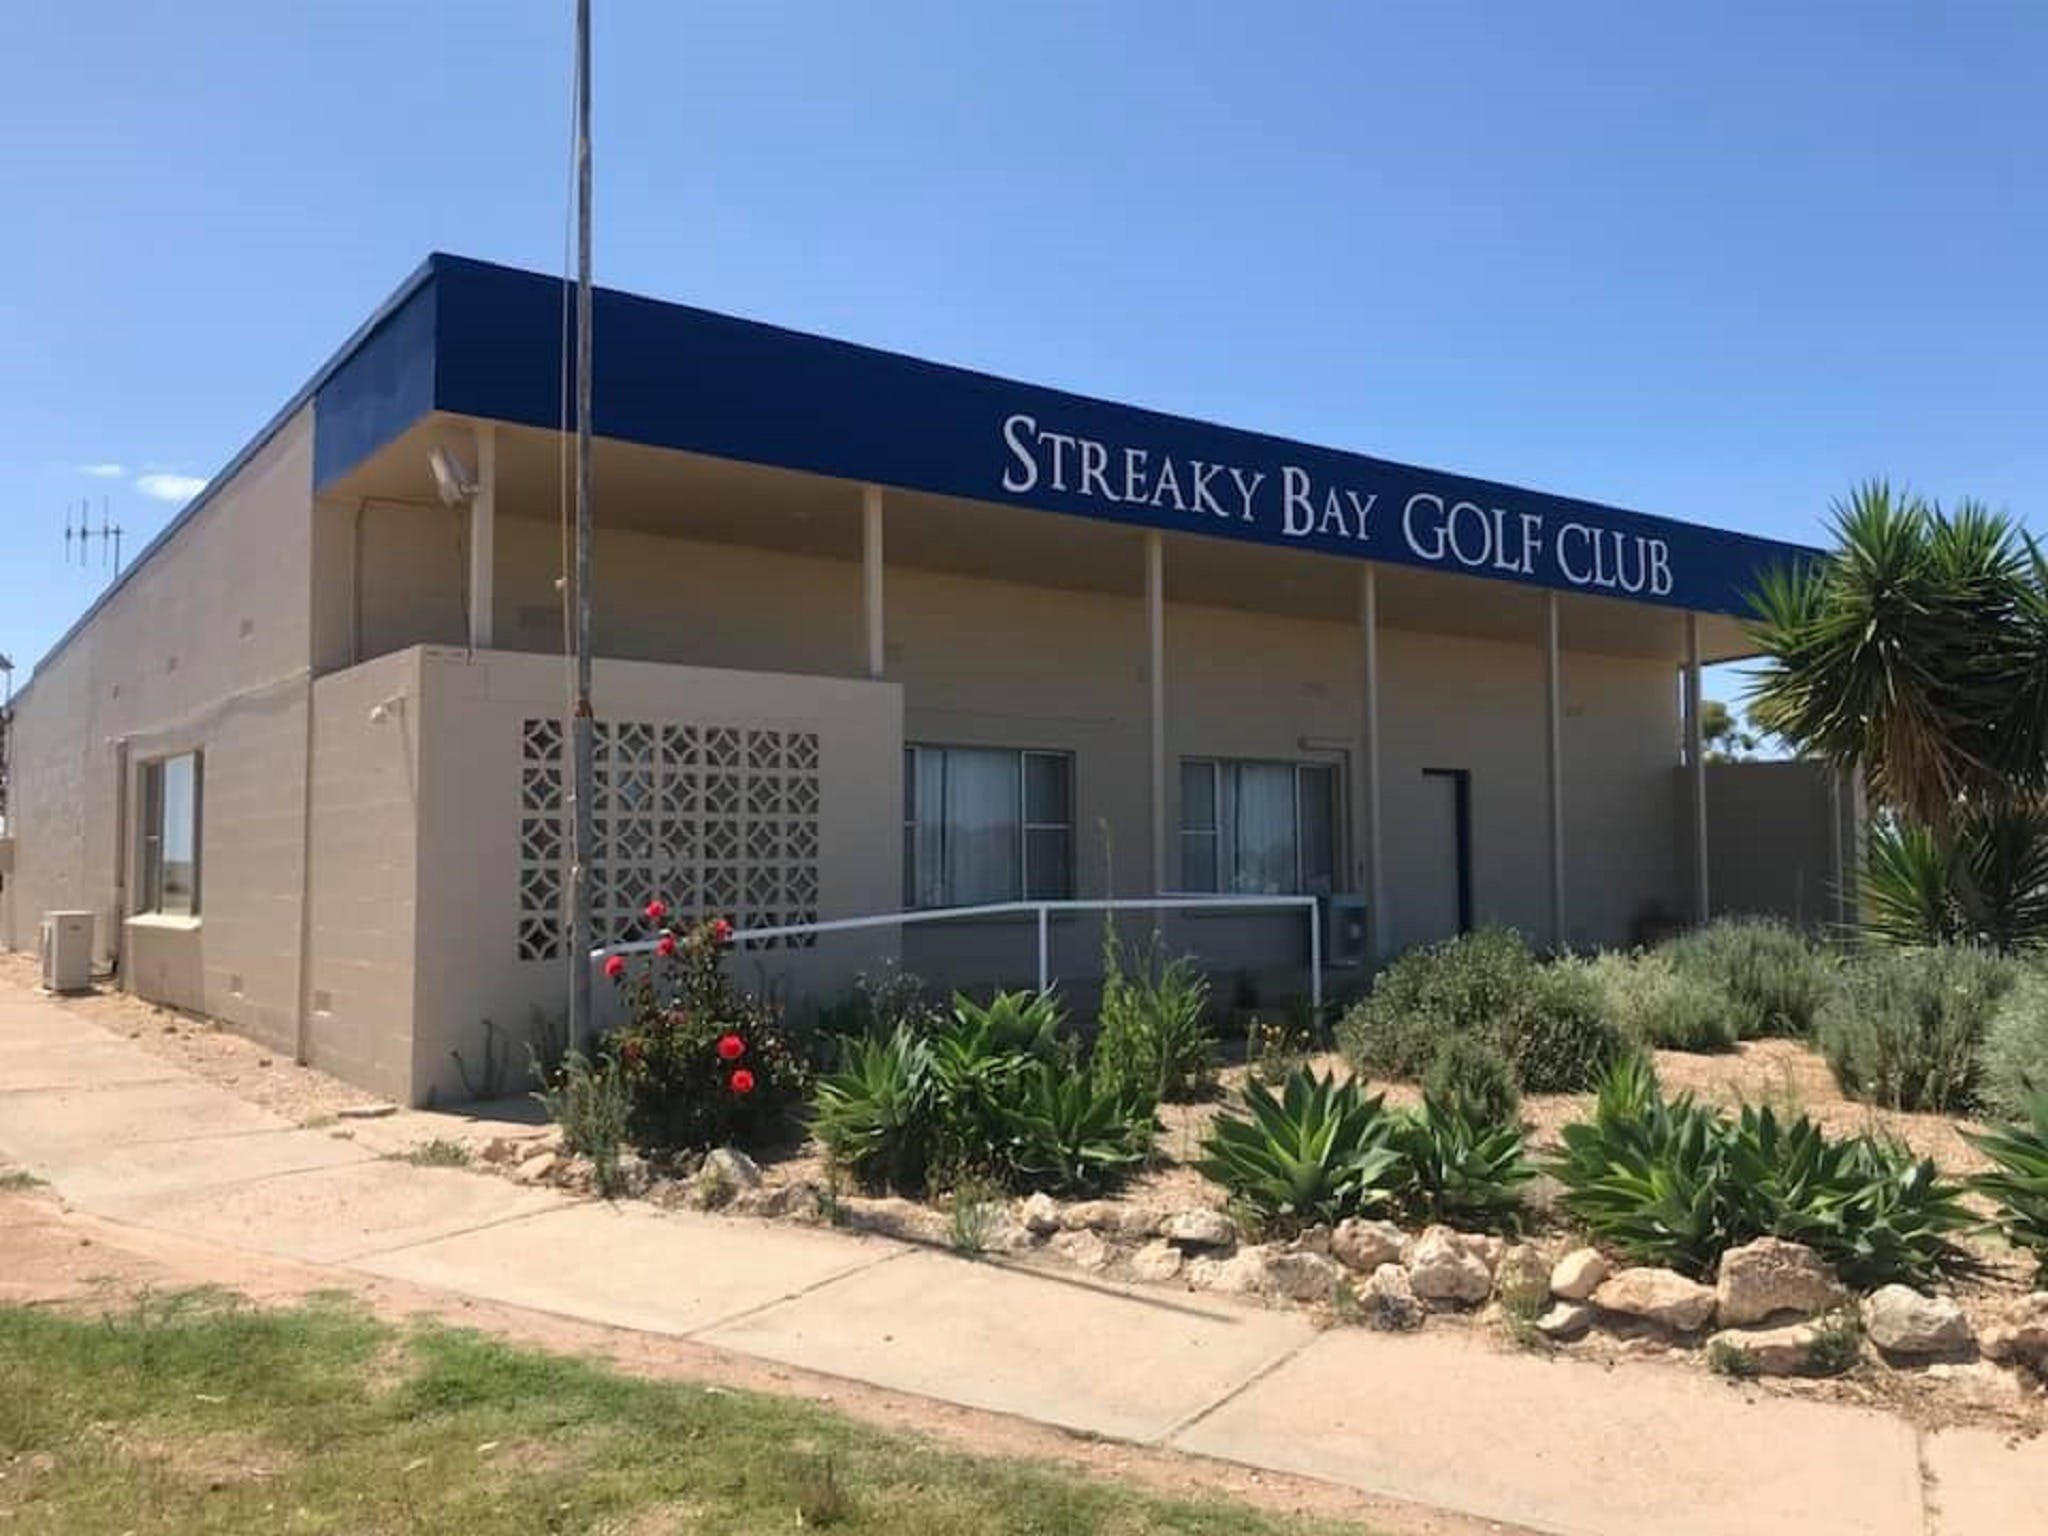 Streaky Bay Golf Club - Find Attractions